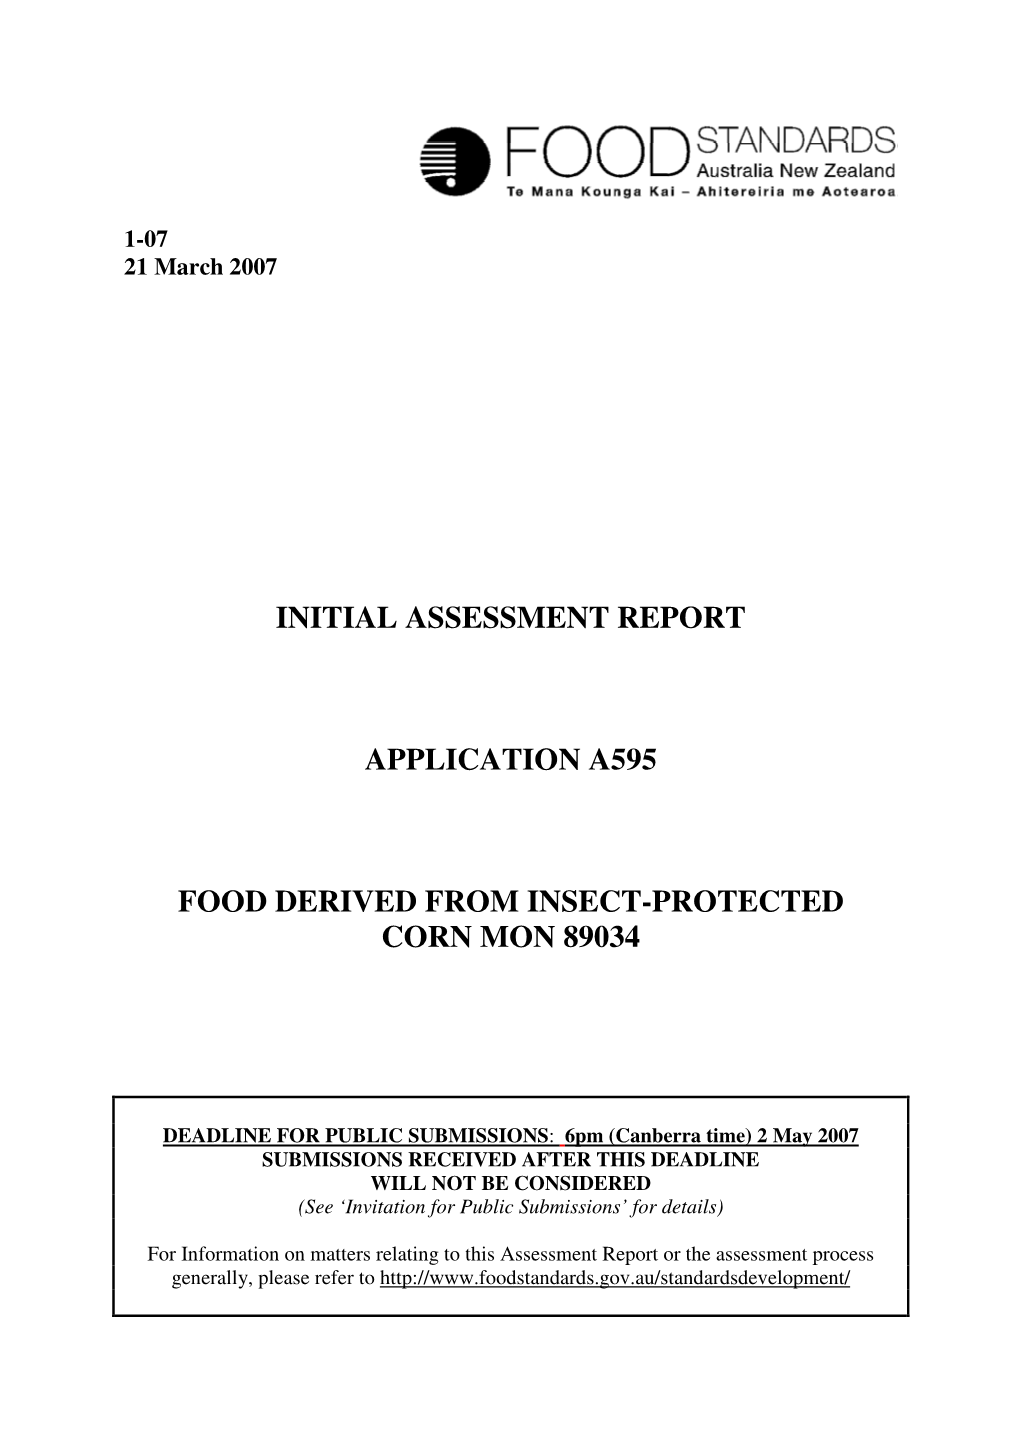 Initial Assessment Report Application A595 Food